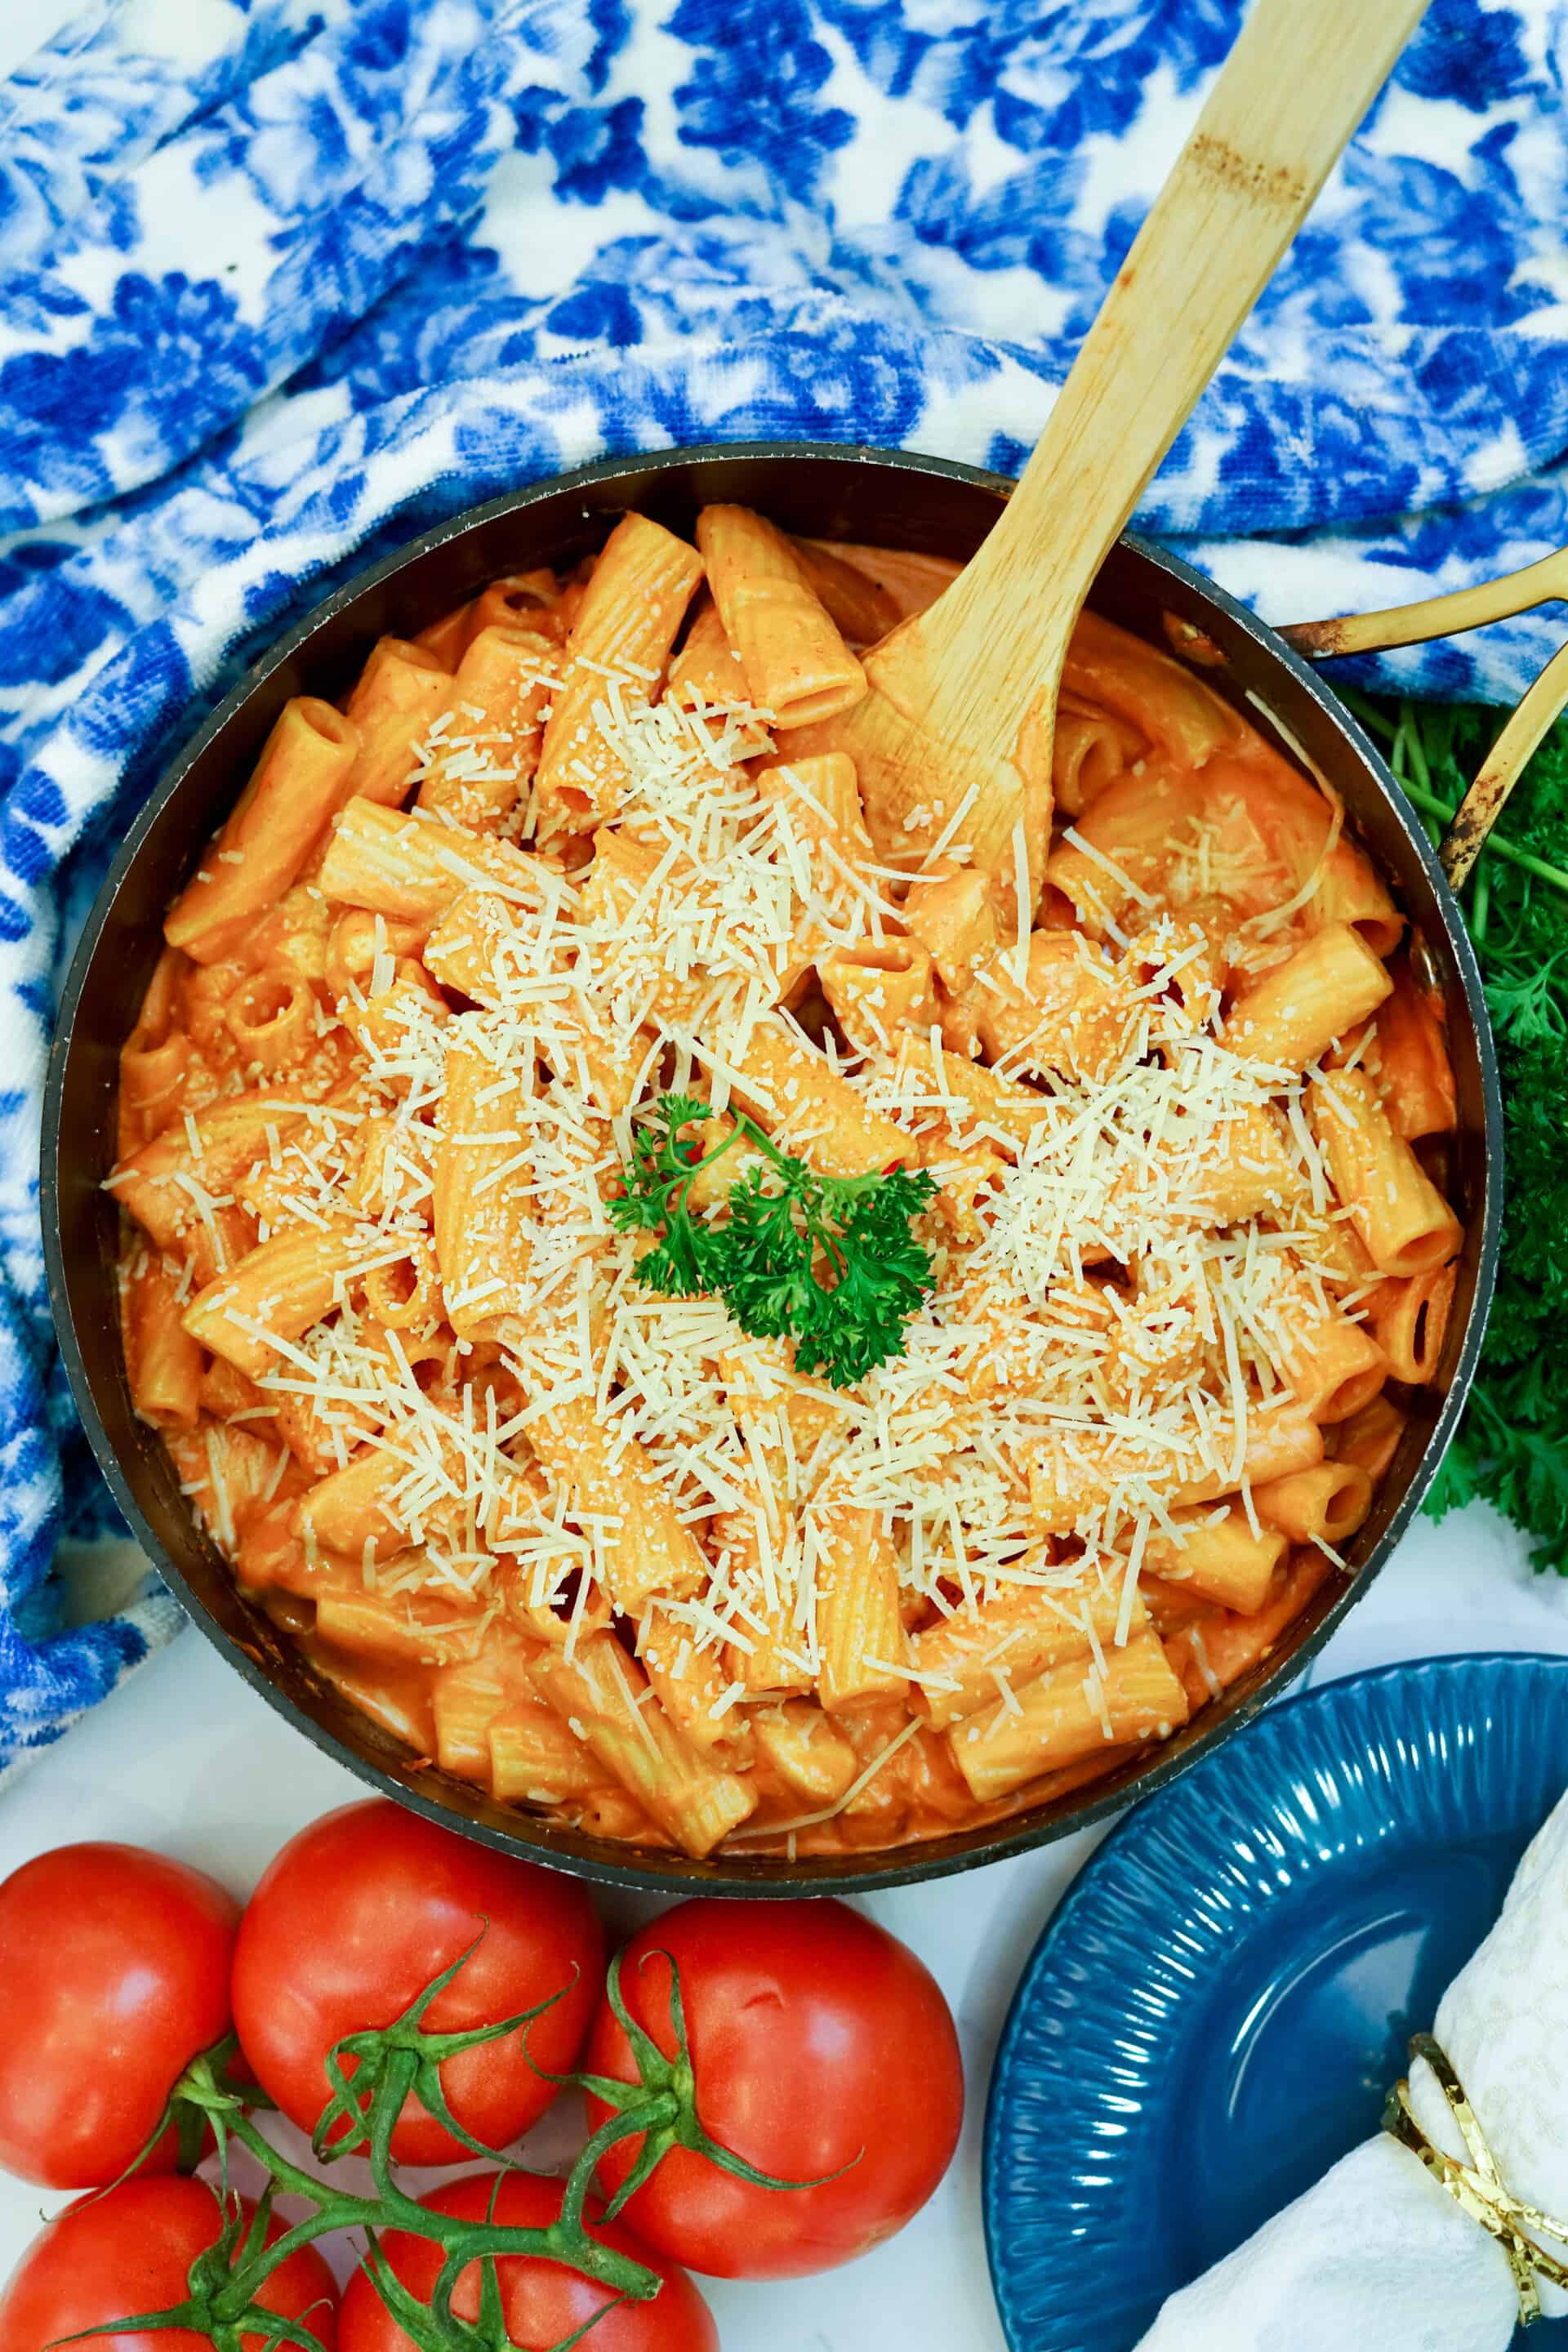 This easy pasta alla vodka recipe can be made with noodles, rigatoni or penne. The creamy vodka pasta sauce is simply delicious!